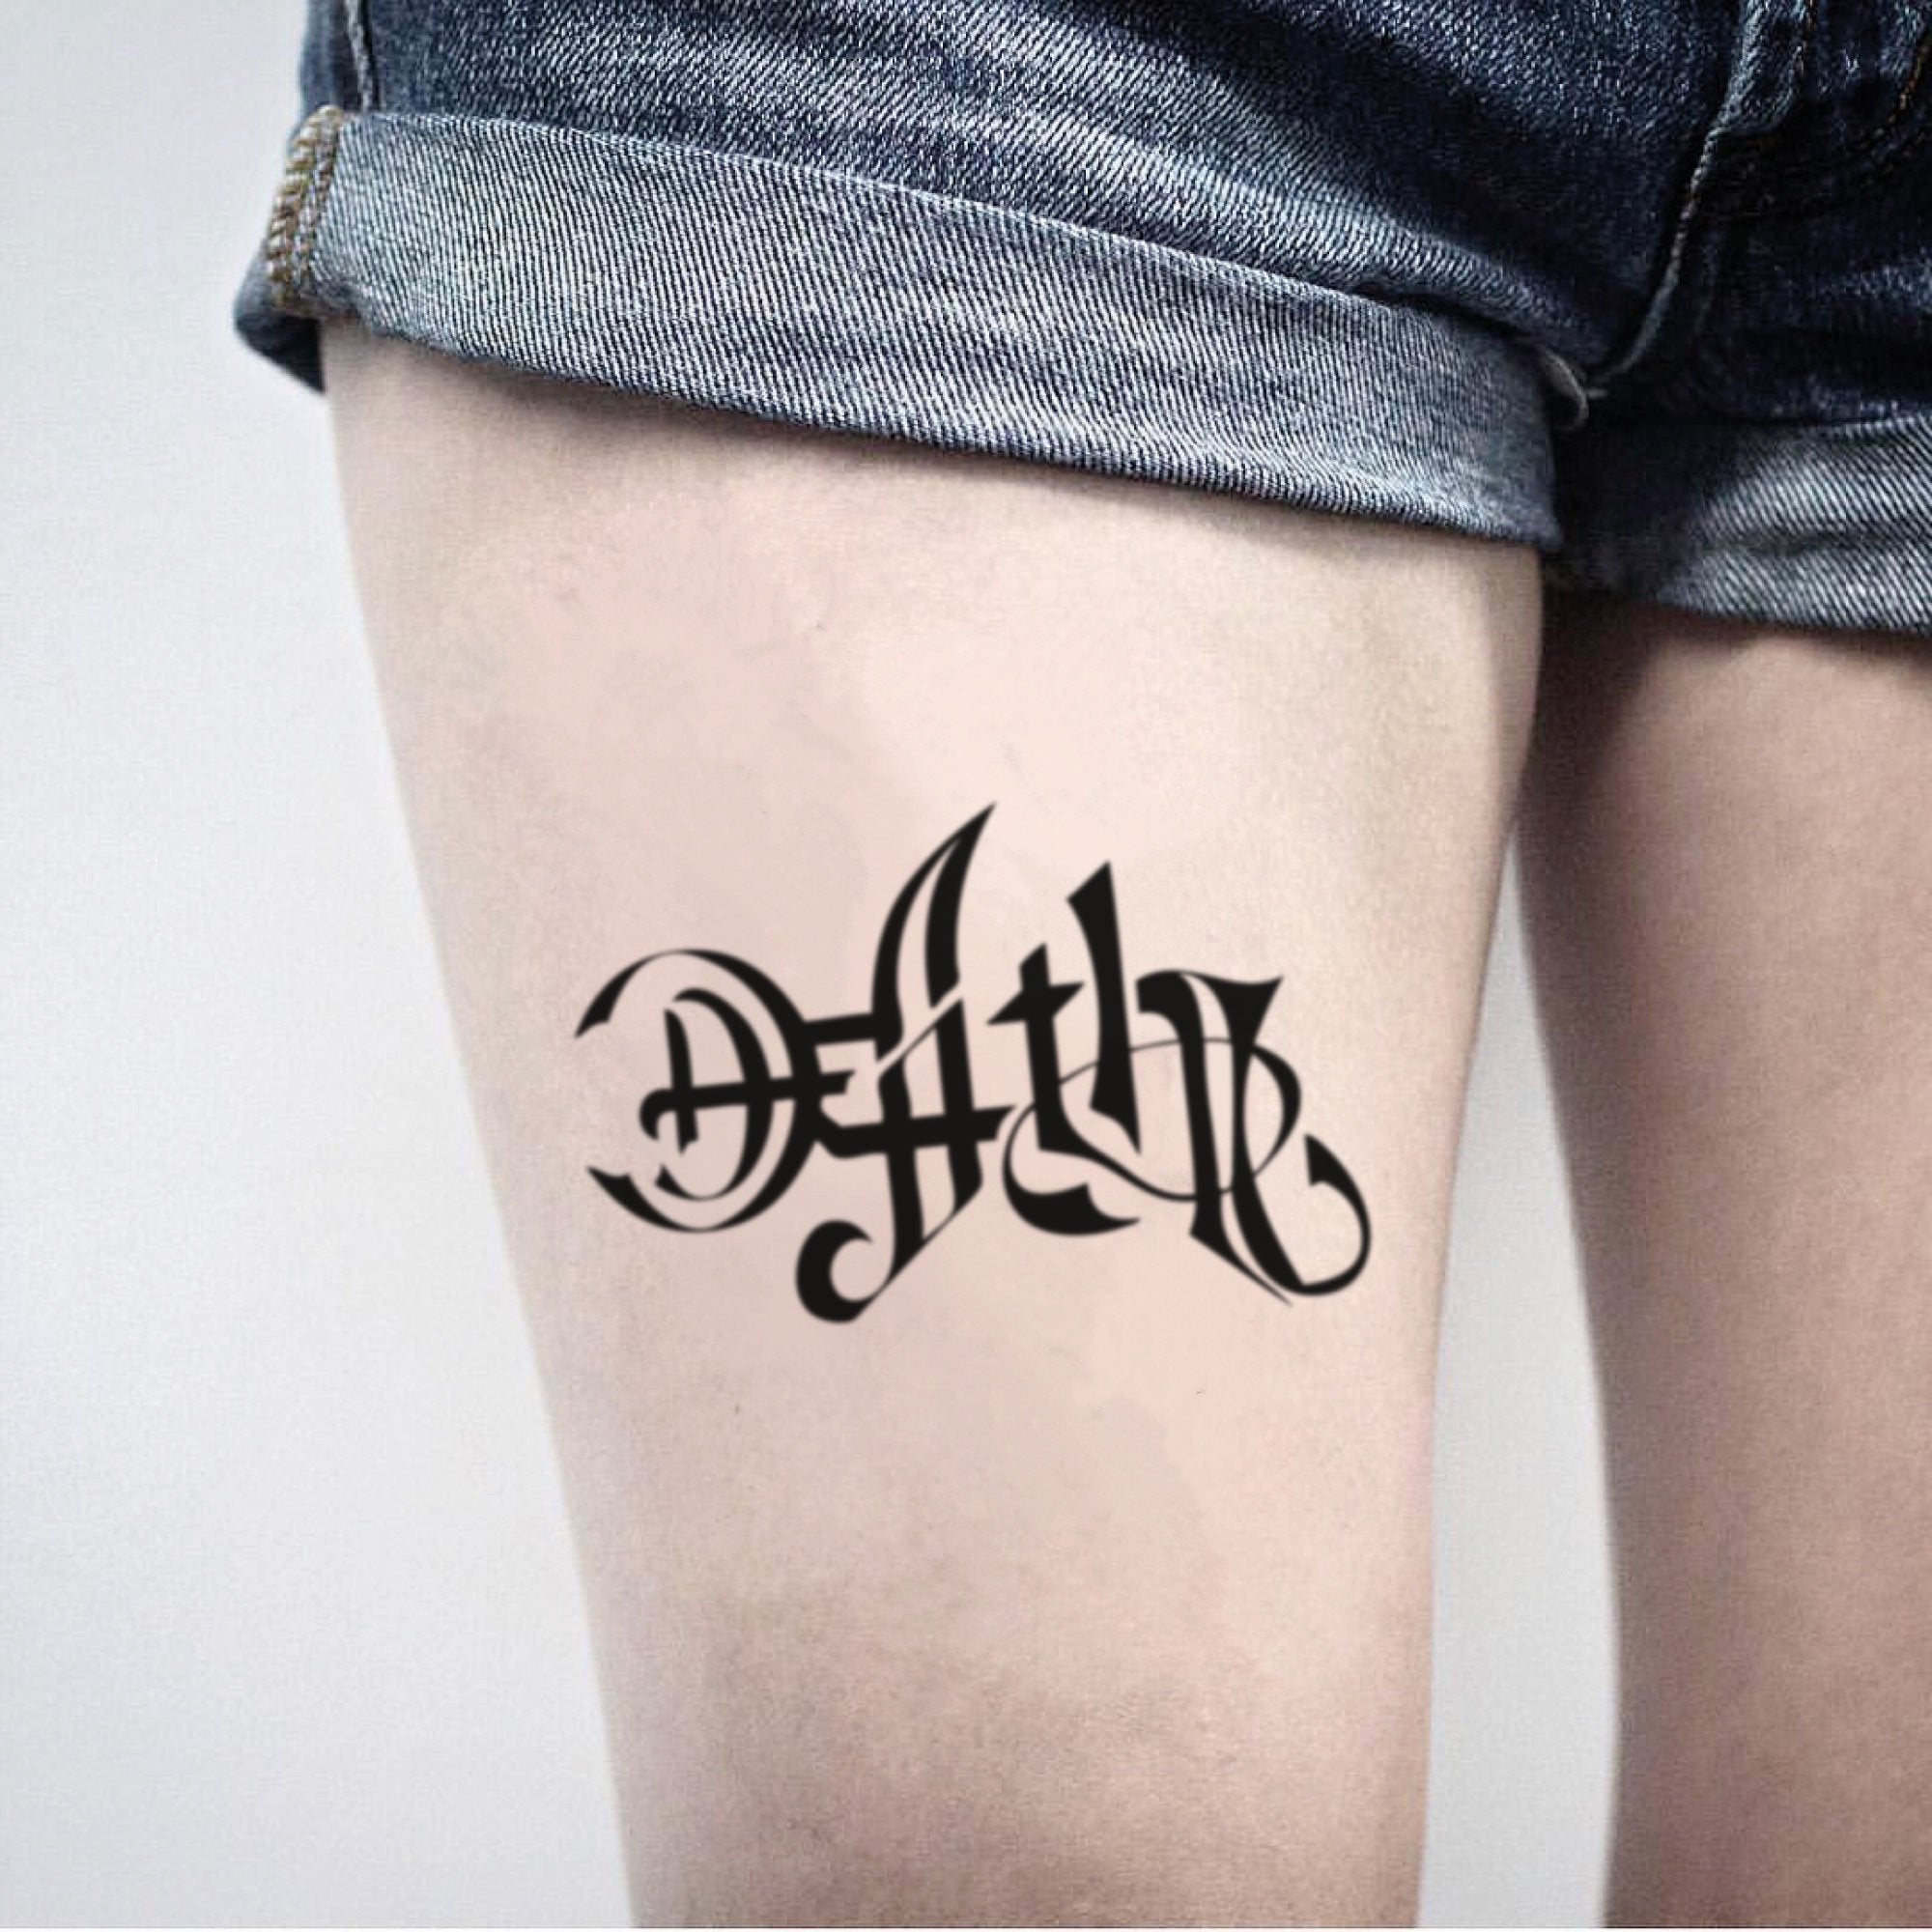 Men Show Simple Ambigram Font Tattoo On Side Of Hand